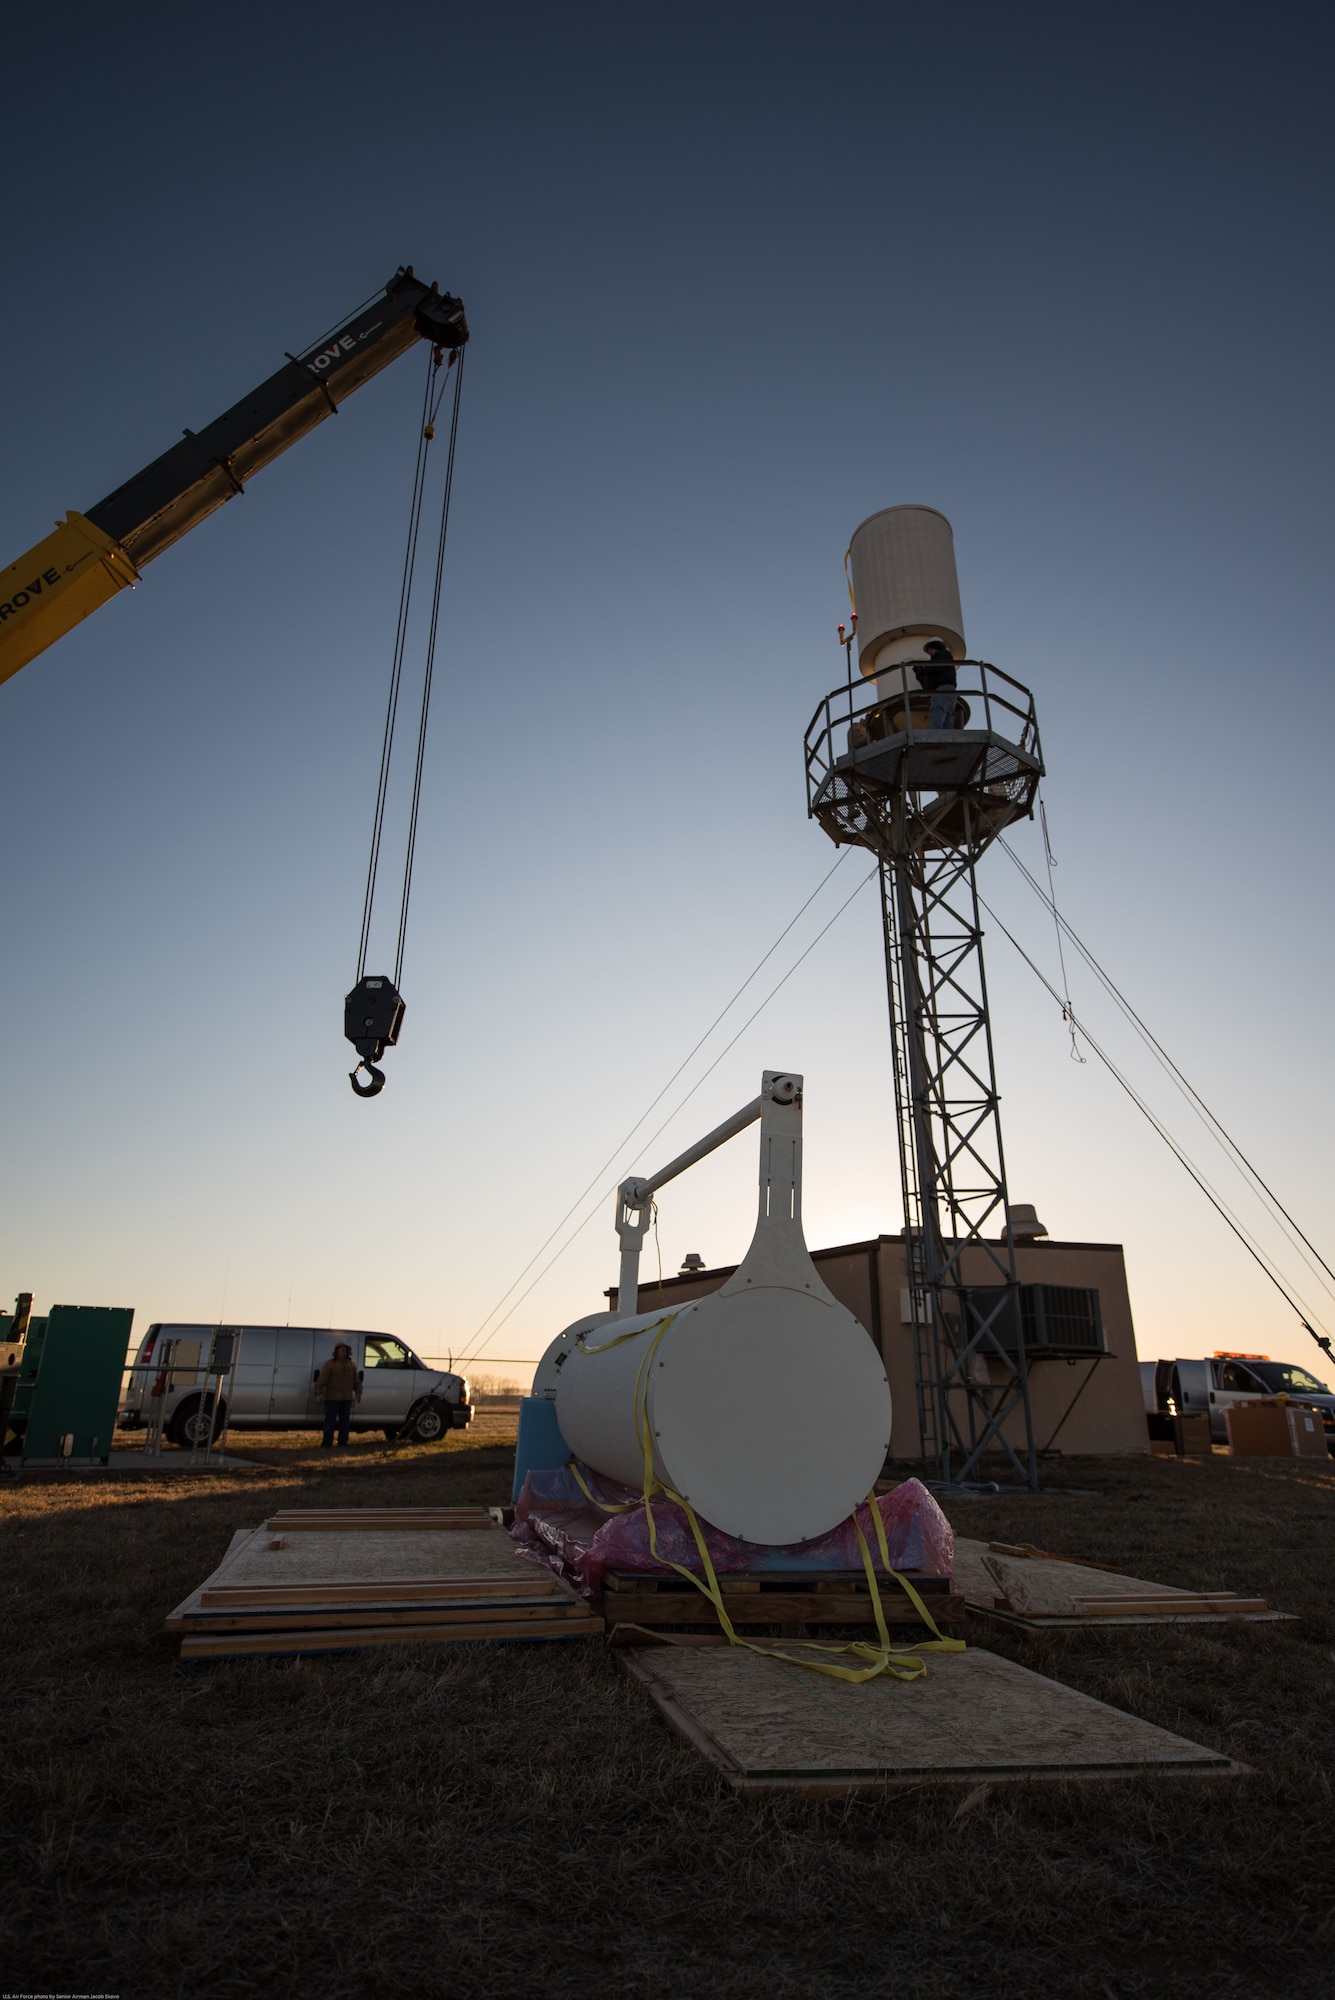 Airmen and contractors prepare to remove a legacy Tactical Air Navigation System from its tower and replace it with a modern version at Offutt Air Force Base, Nebraska, Nov. 29, 2017.